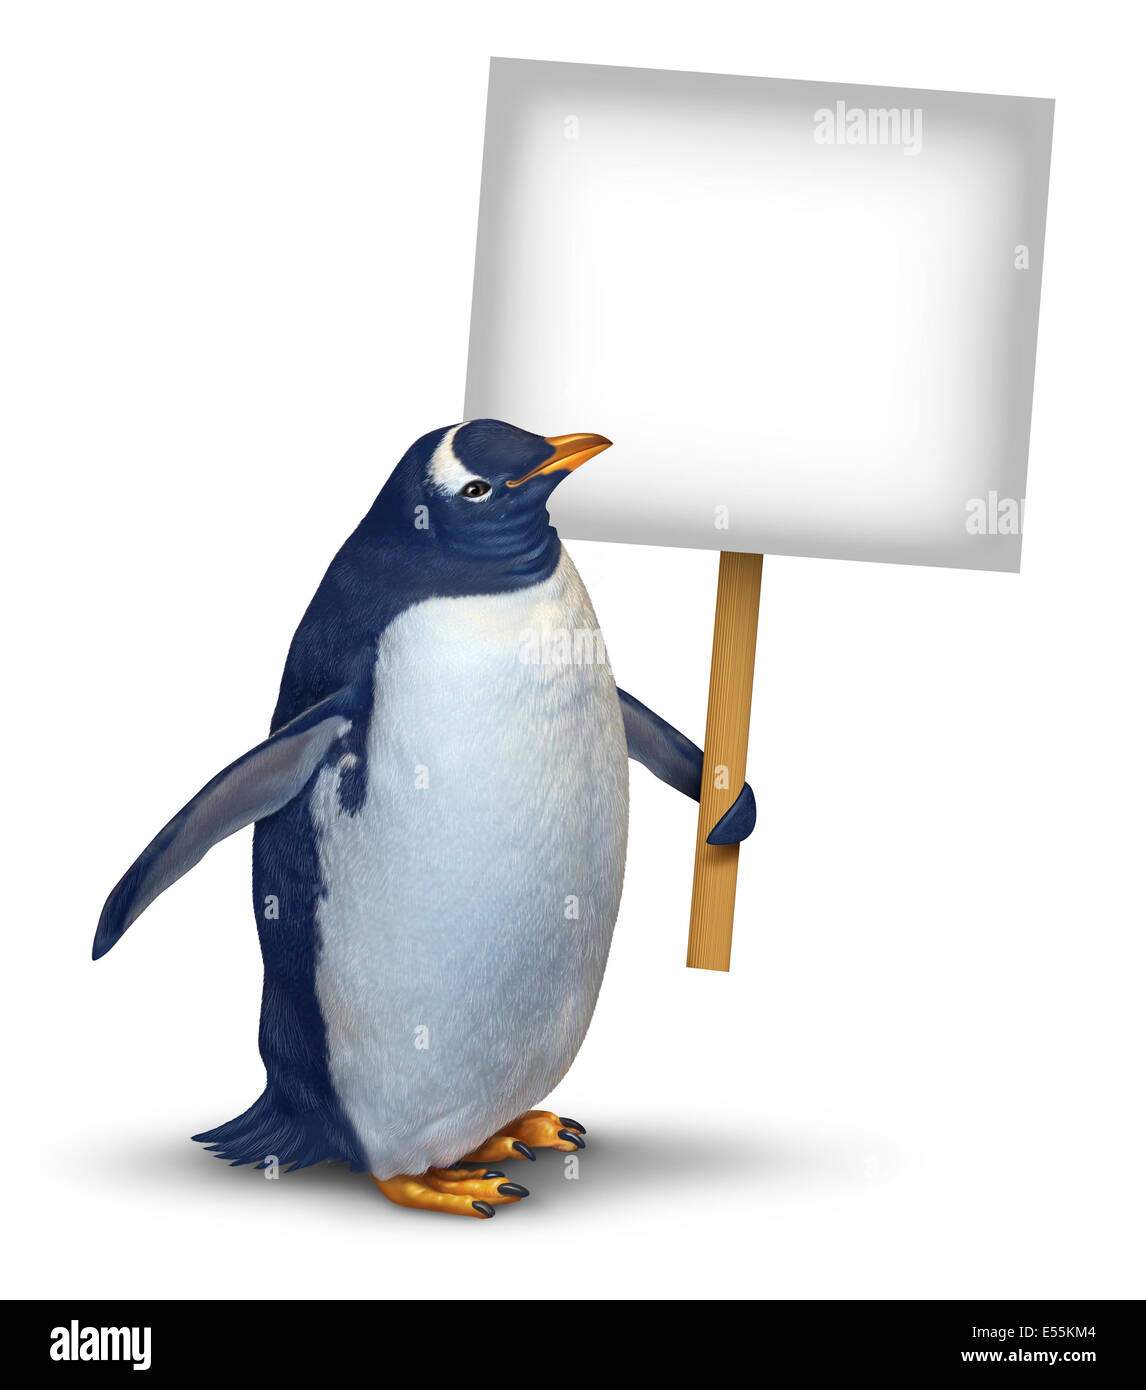 Penguin holding a blank card sign as a cute polar bird with a smiling happy expression supporting and communicating a message pertaining to animal welfare and wildlife on an isolated white background. Stock Photo